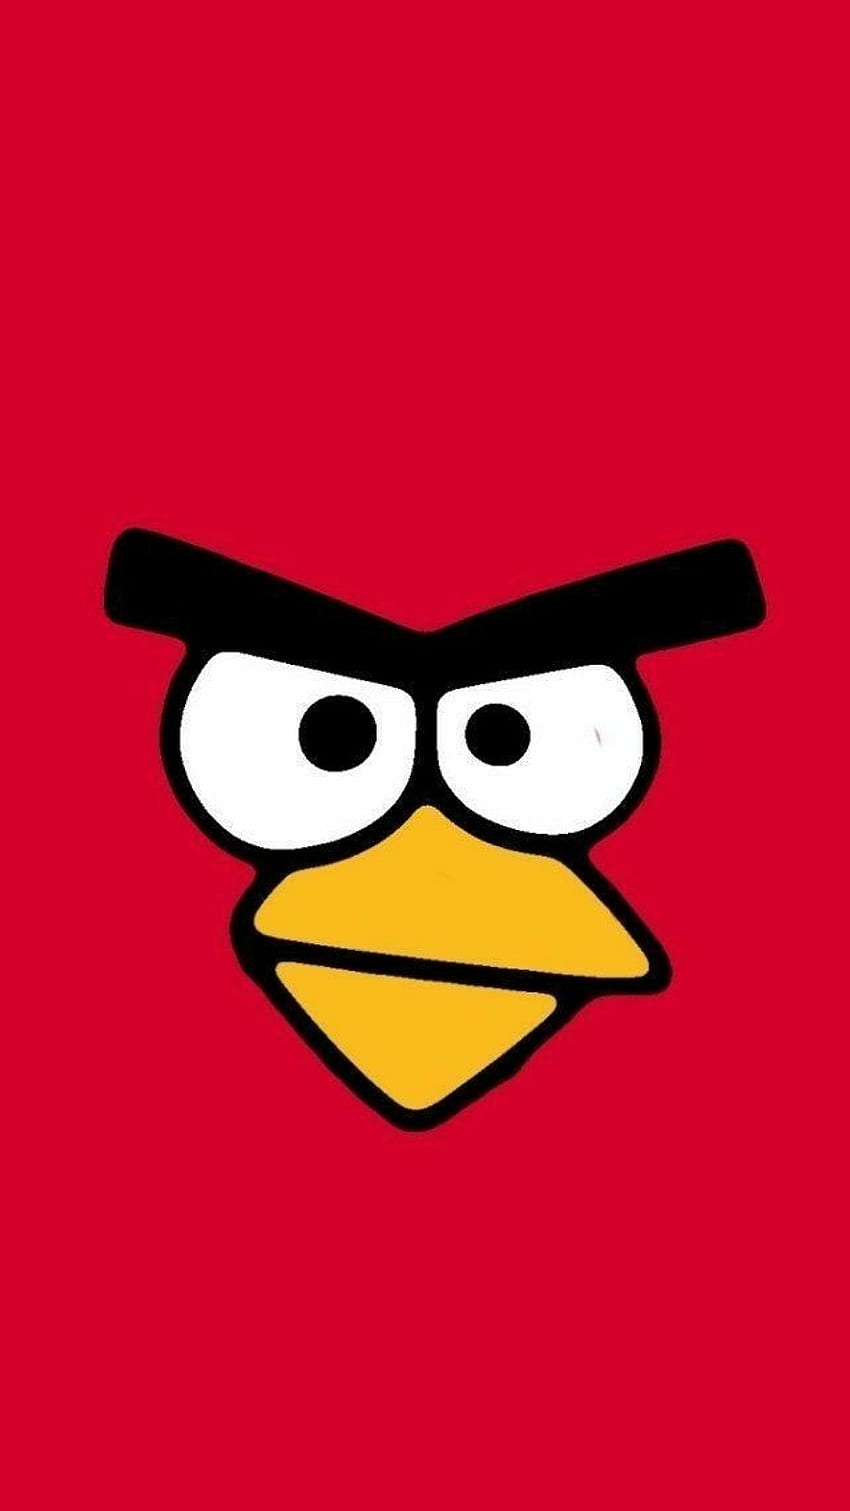 Angry Bird for Phone - Best Wallapers - Best , Birds Mobile HD phone wallpaper